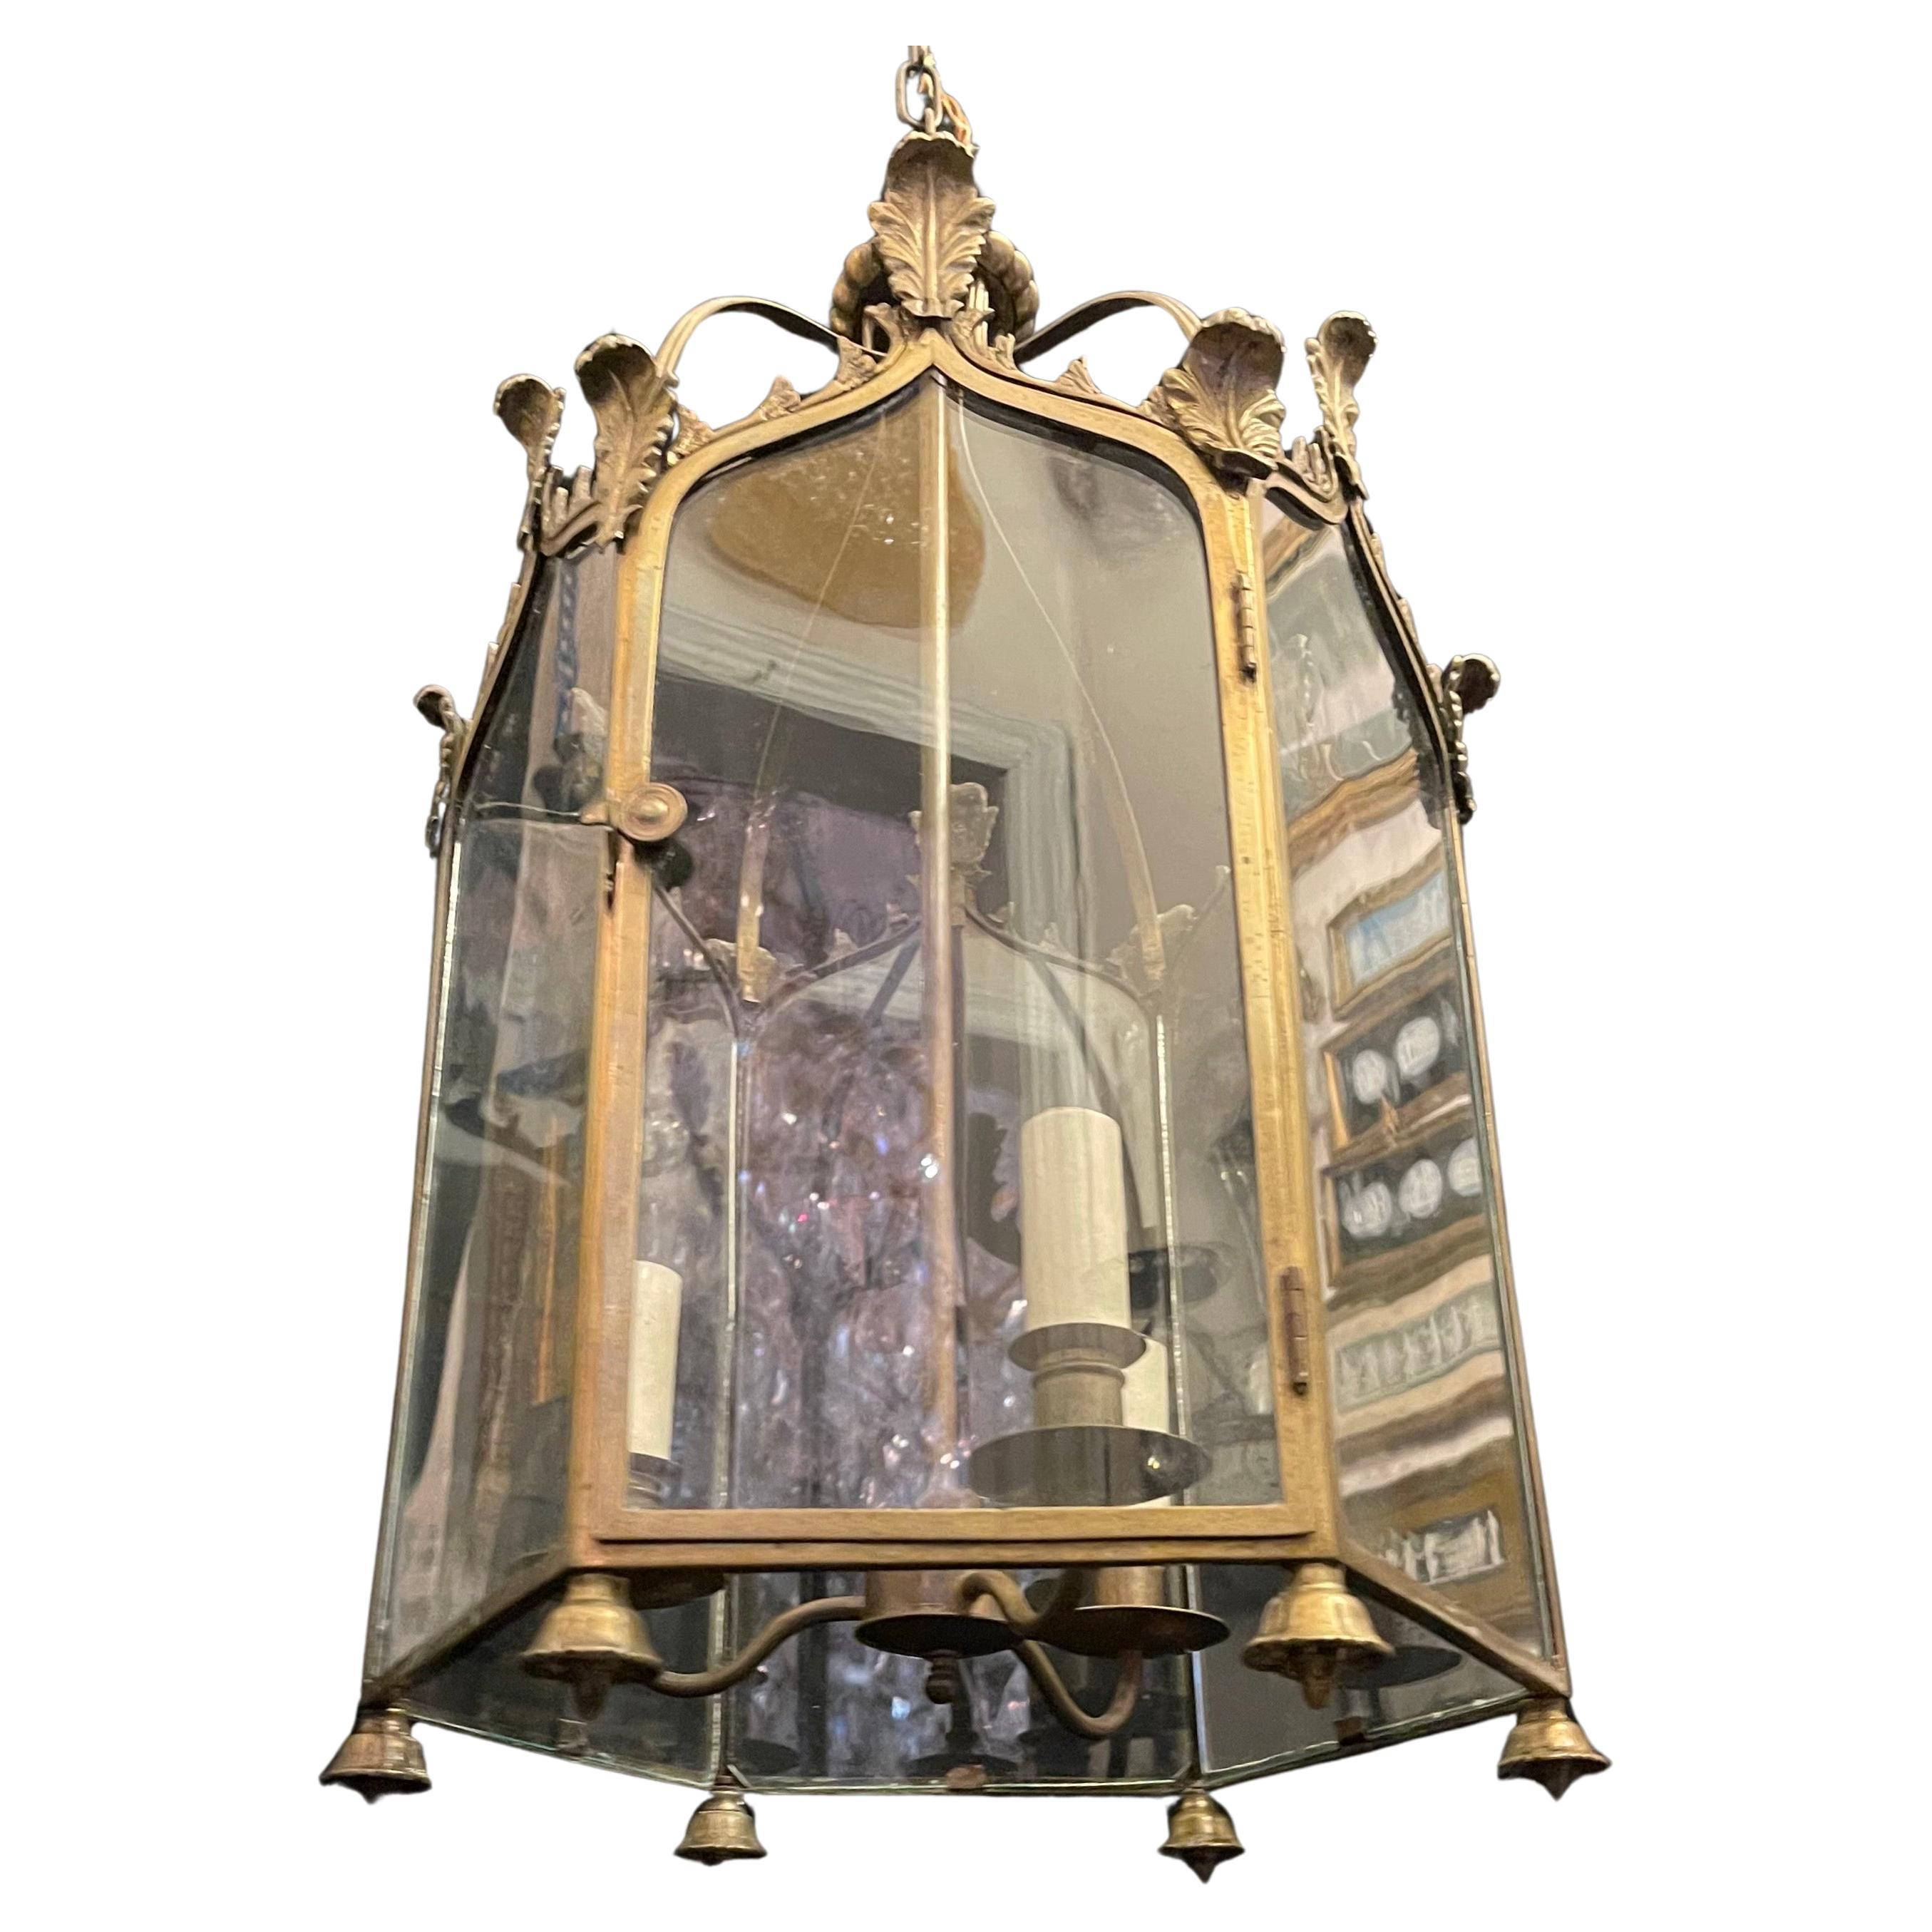 Wonderful Vaughan 3 Light Bronze Glass Regency Hall Large Lantern Light Fixture In Good Condition For Sale In Roslyn, NY